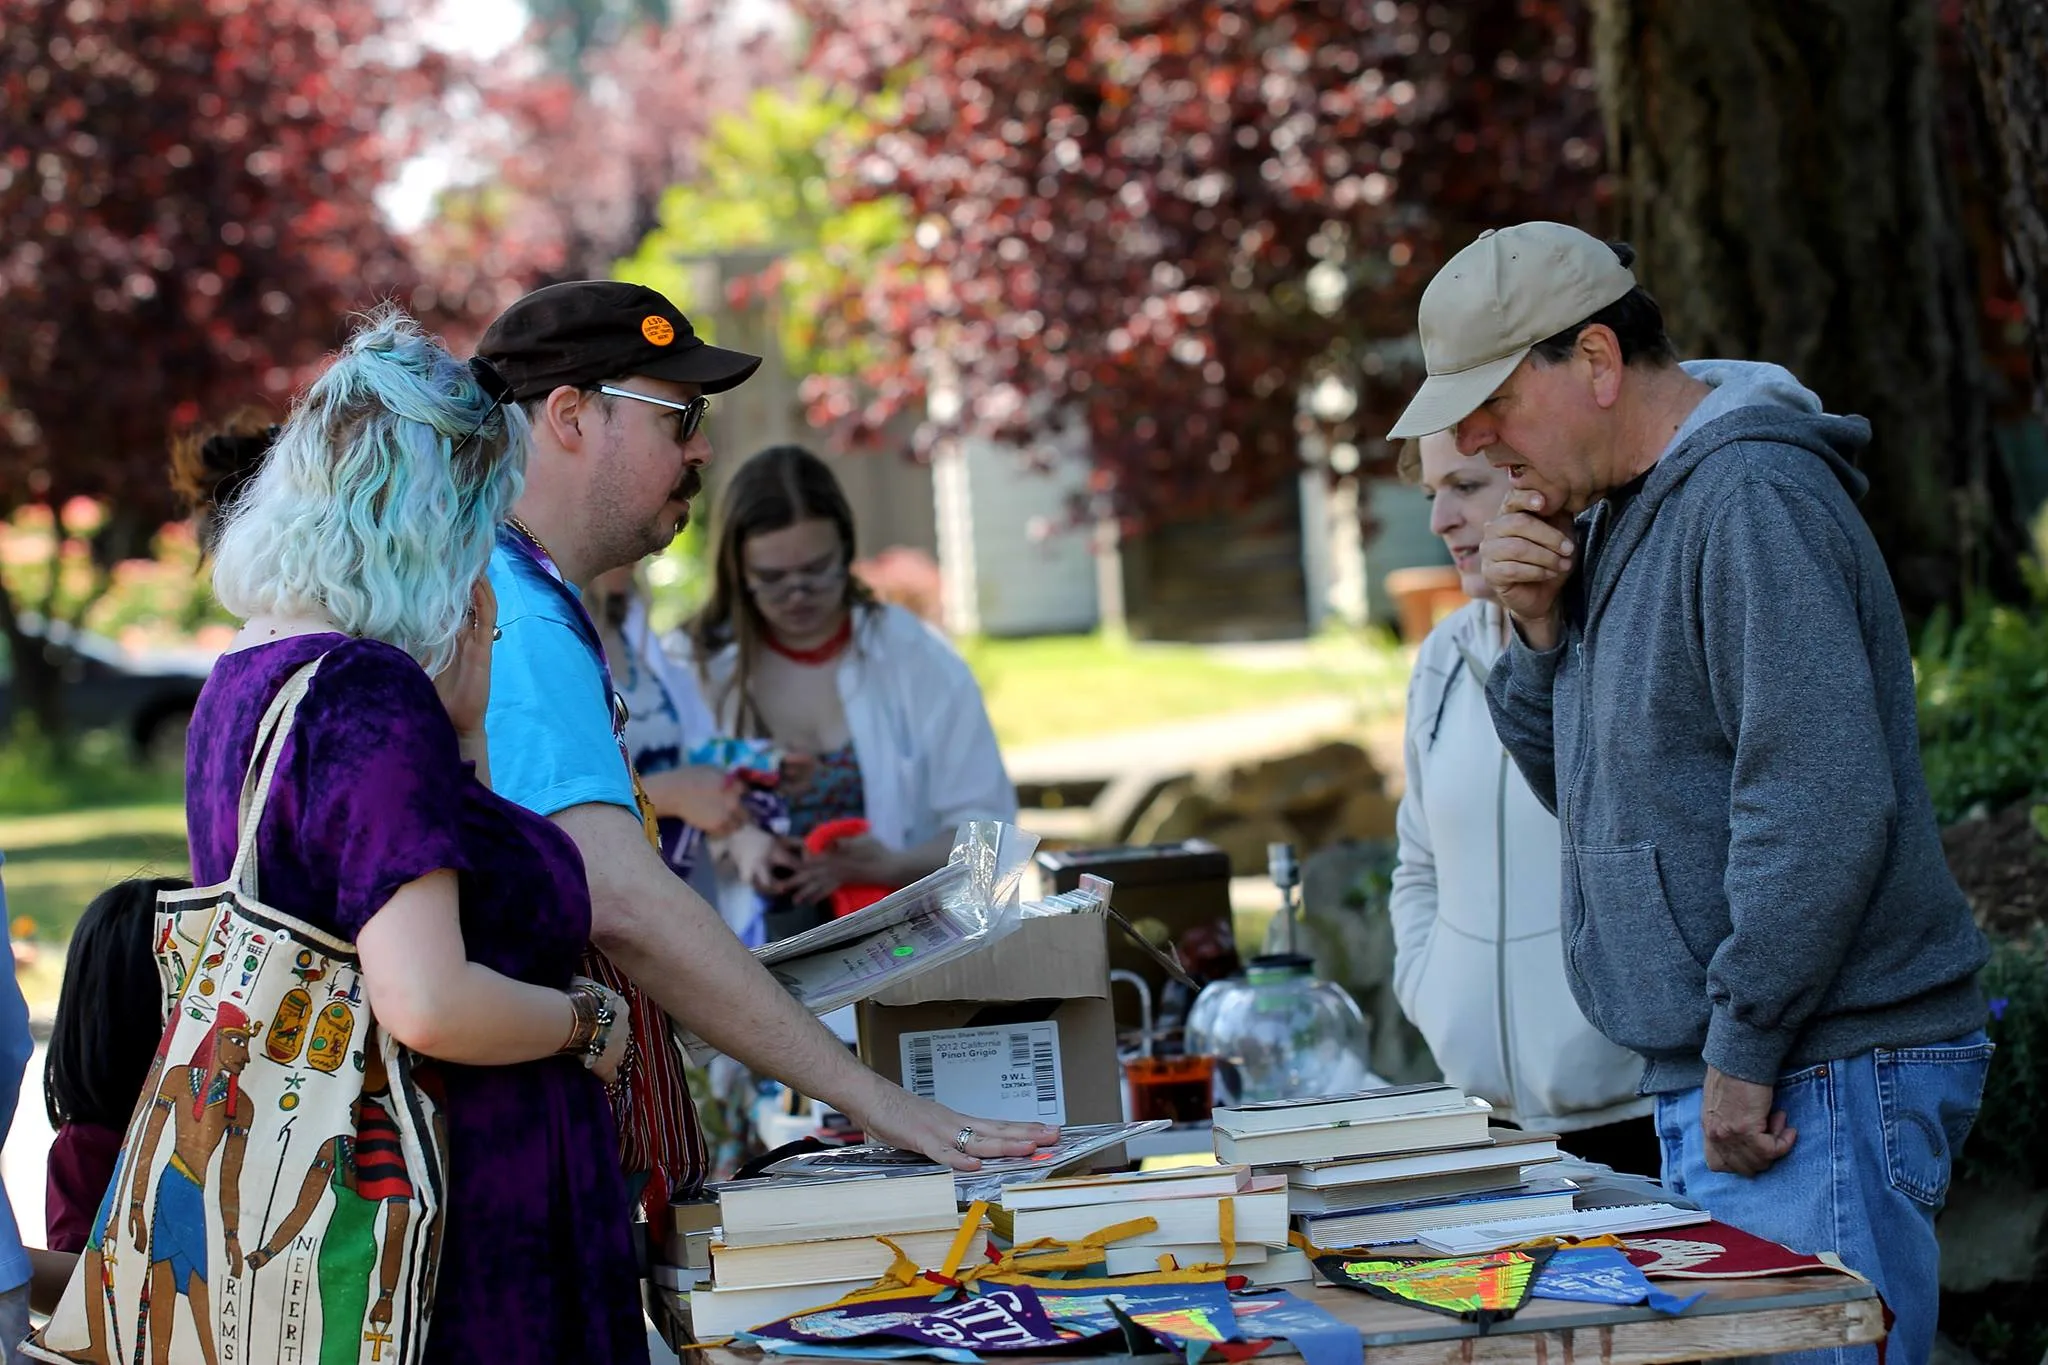 A man and woman discuss prices of books with a vendor at the Phinneywood Garage sale